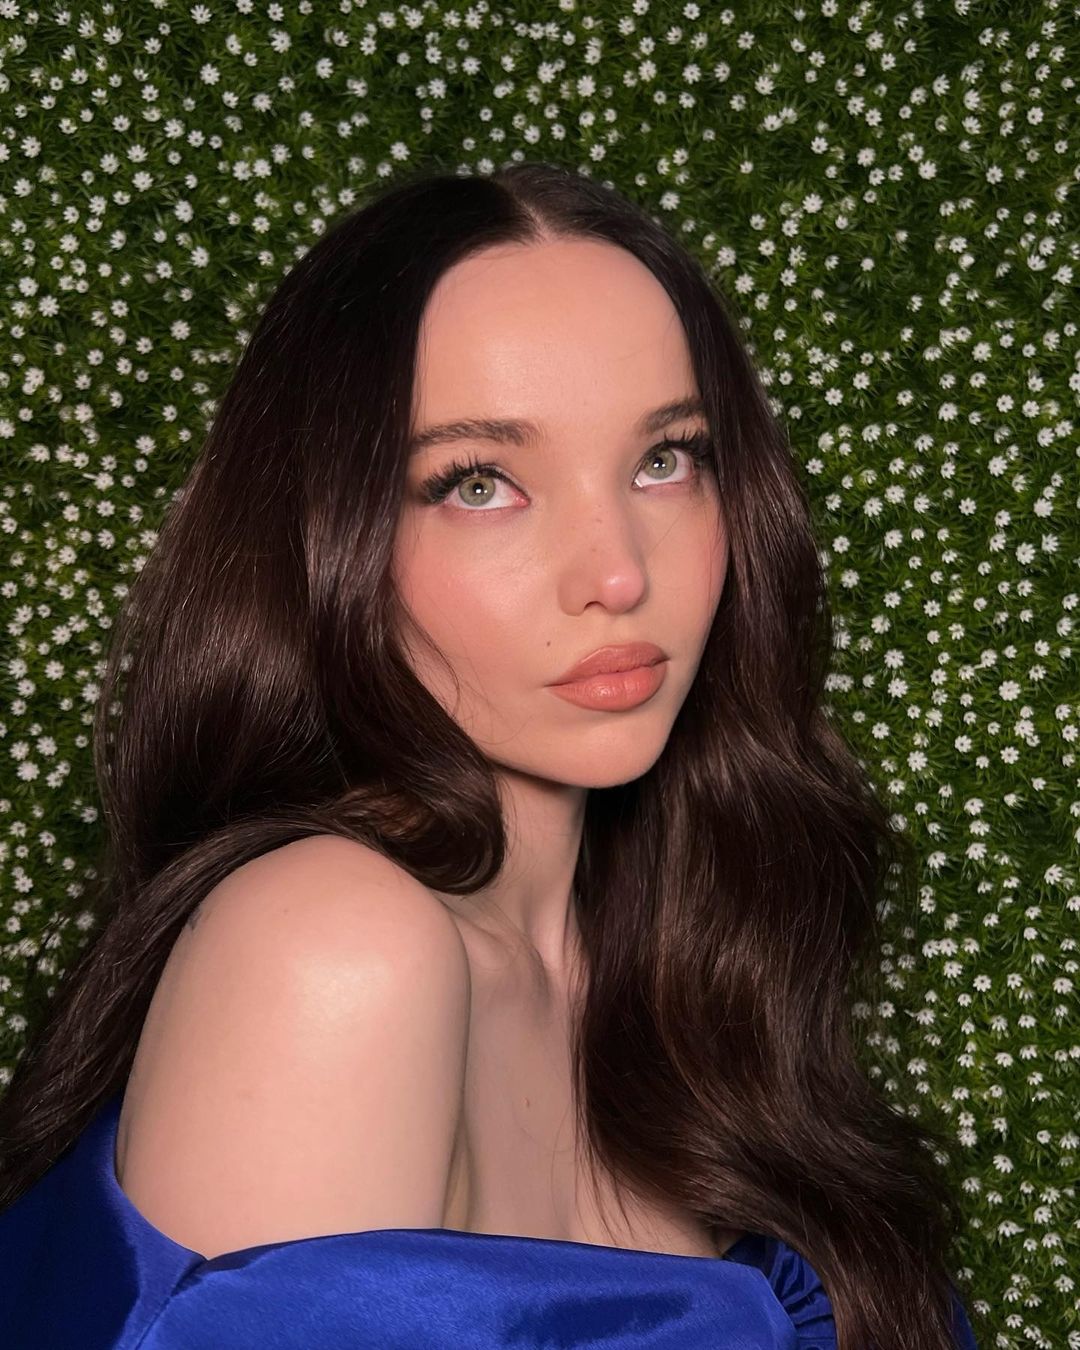 Photos n°30 : Dove Cameron Up Close and Personal!